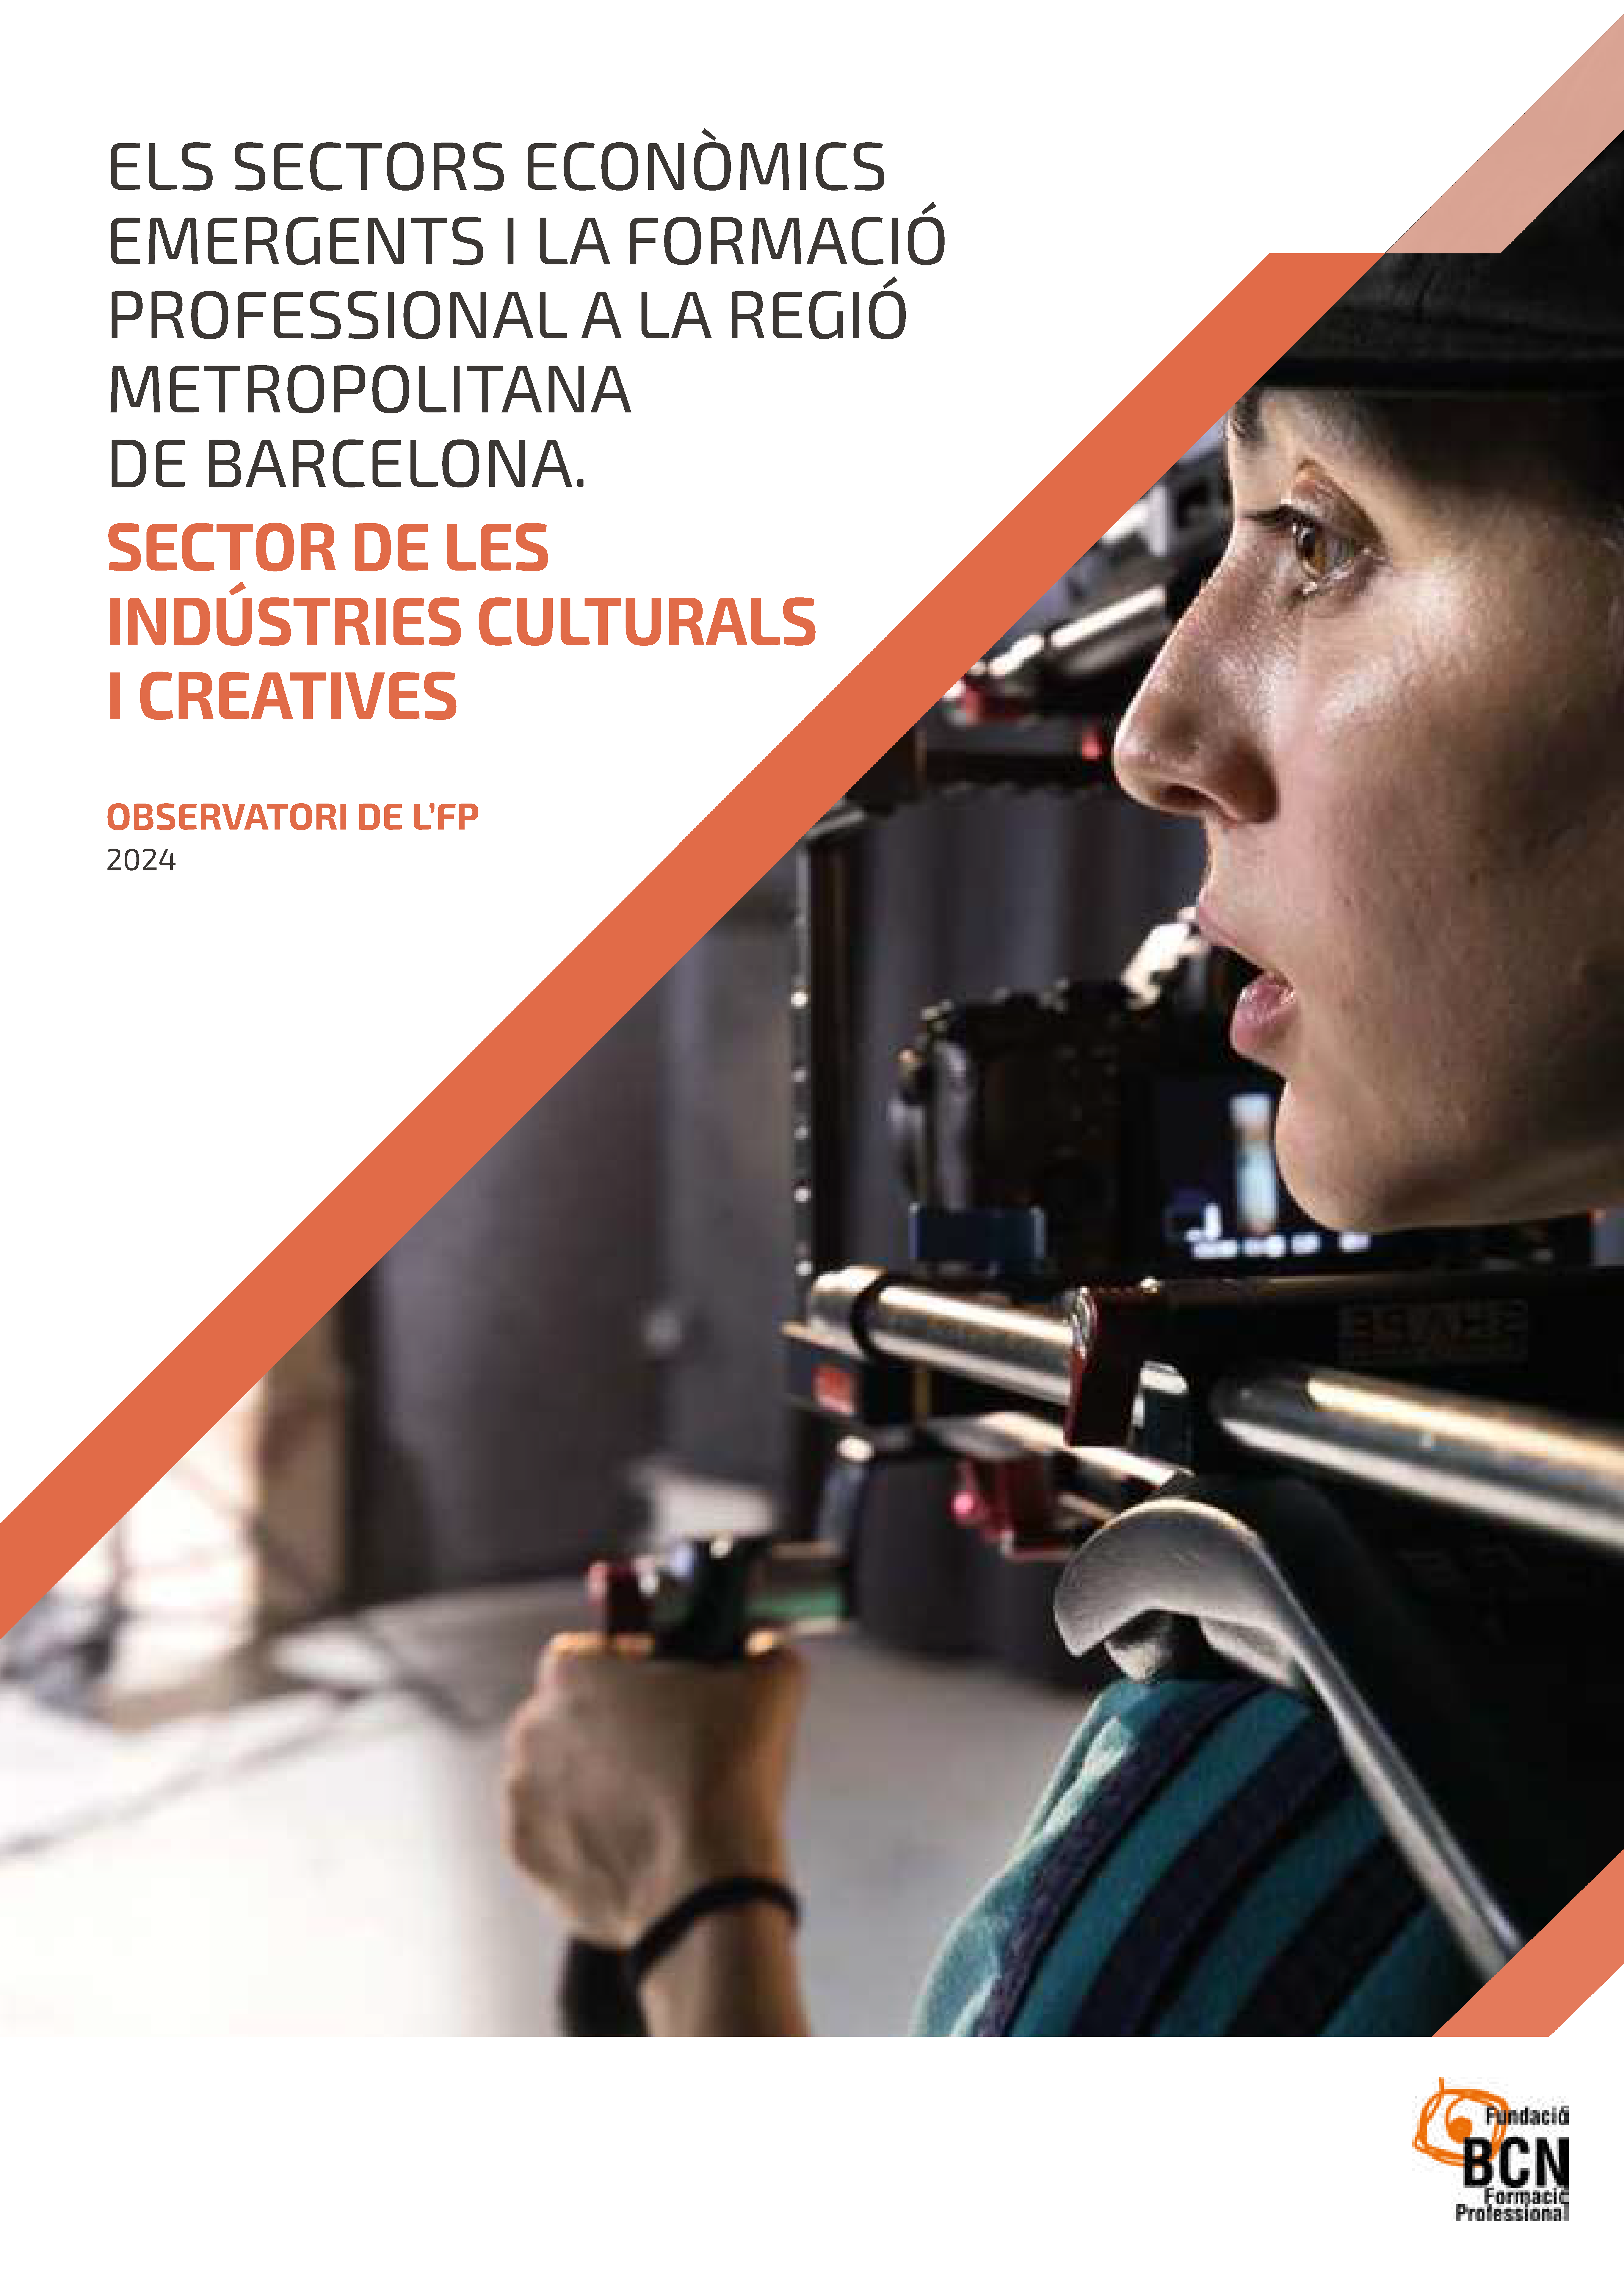 The Cultural and Creative Industries sector in the VET